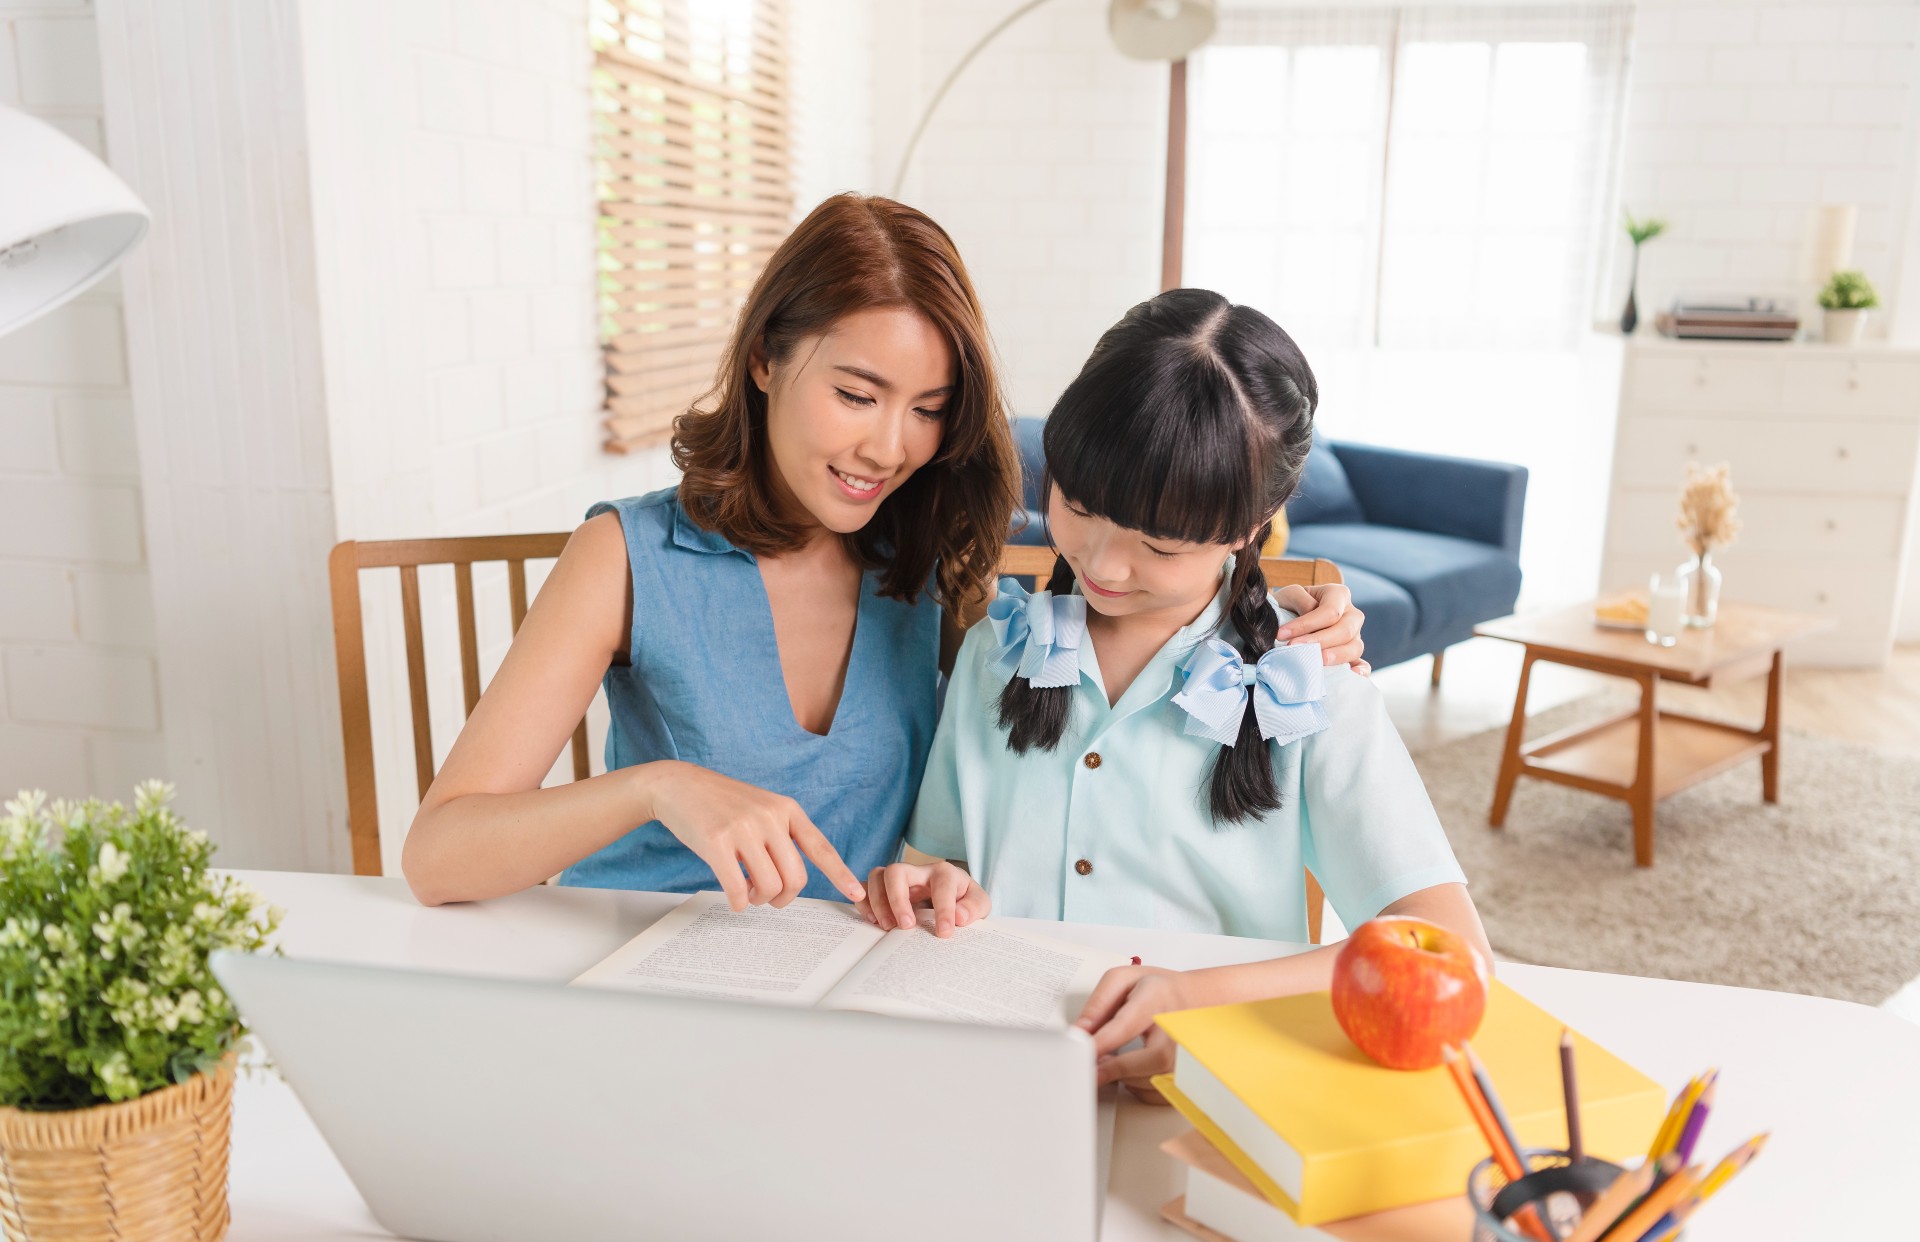 homeschool-asian-little-young-girl-student-learning-sitting-table-working-with-his-mother-home